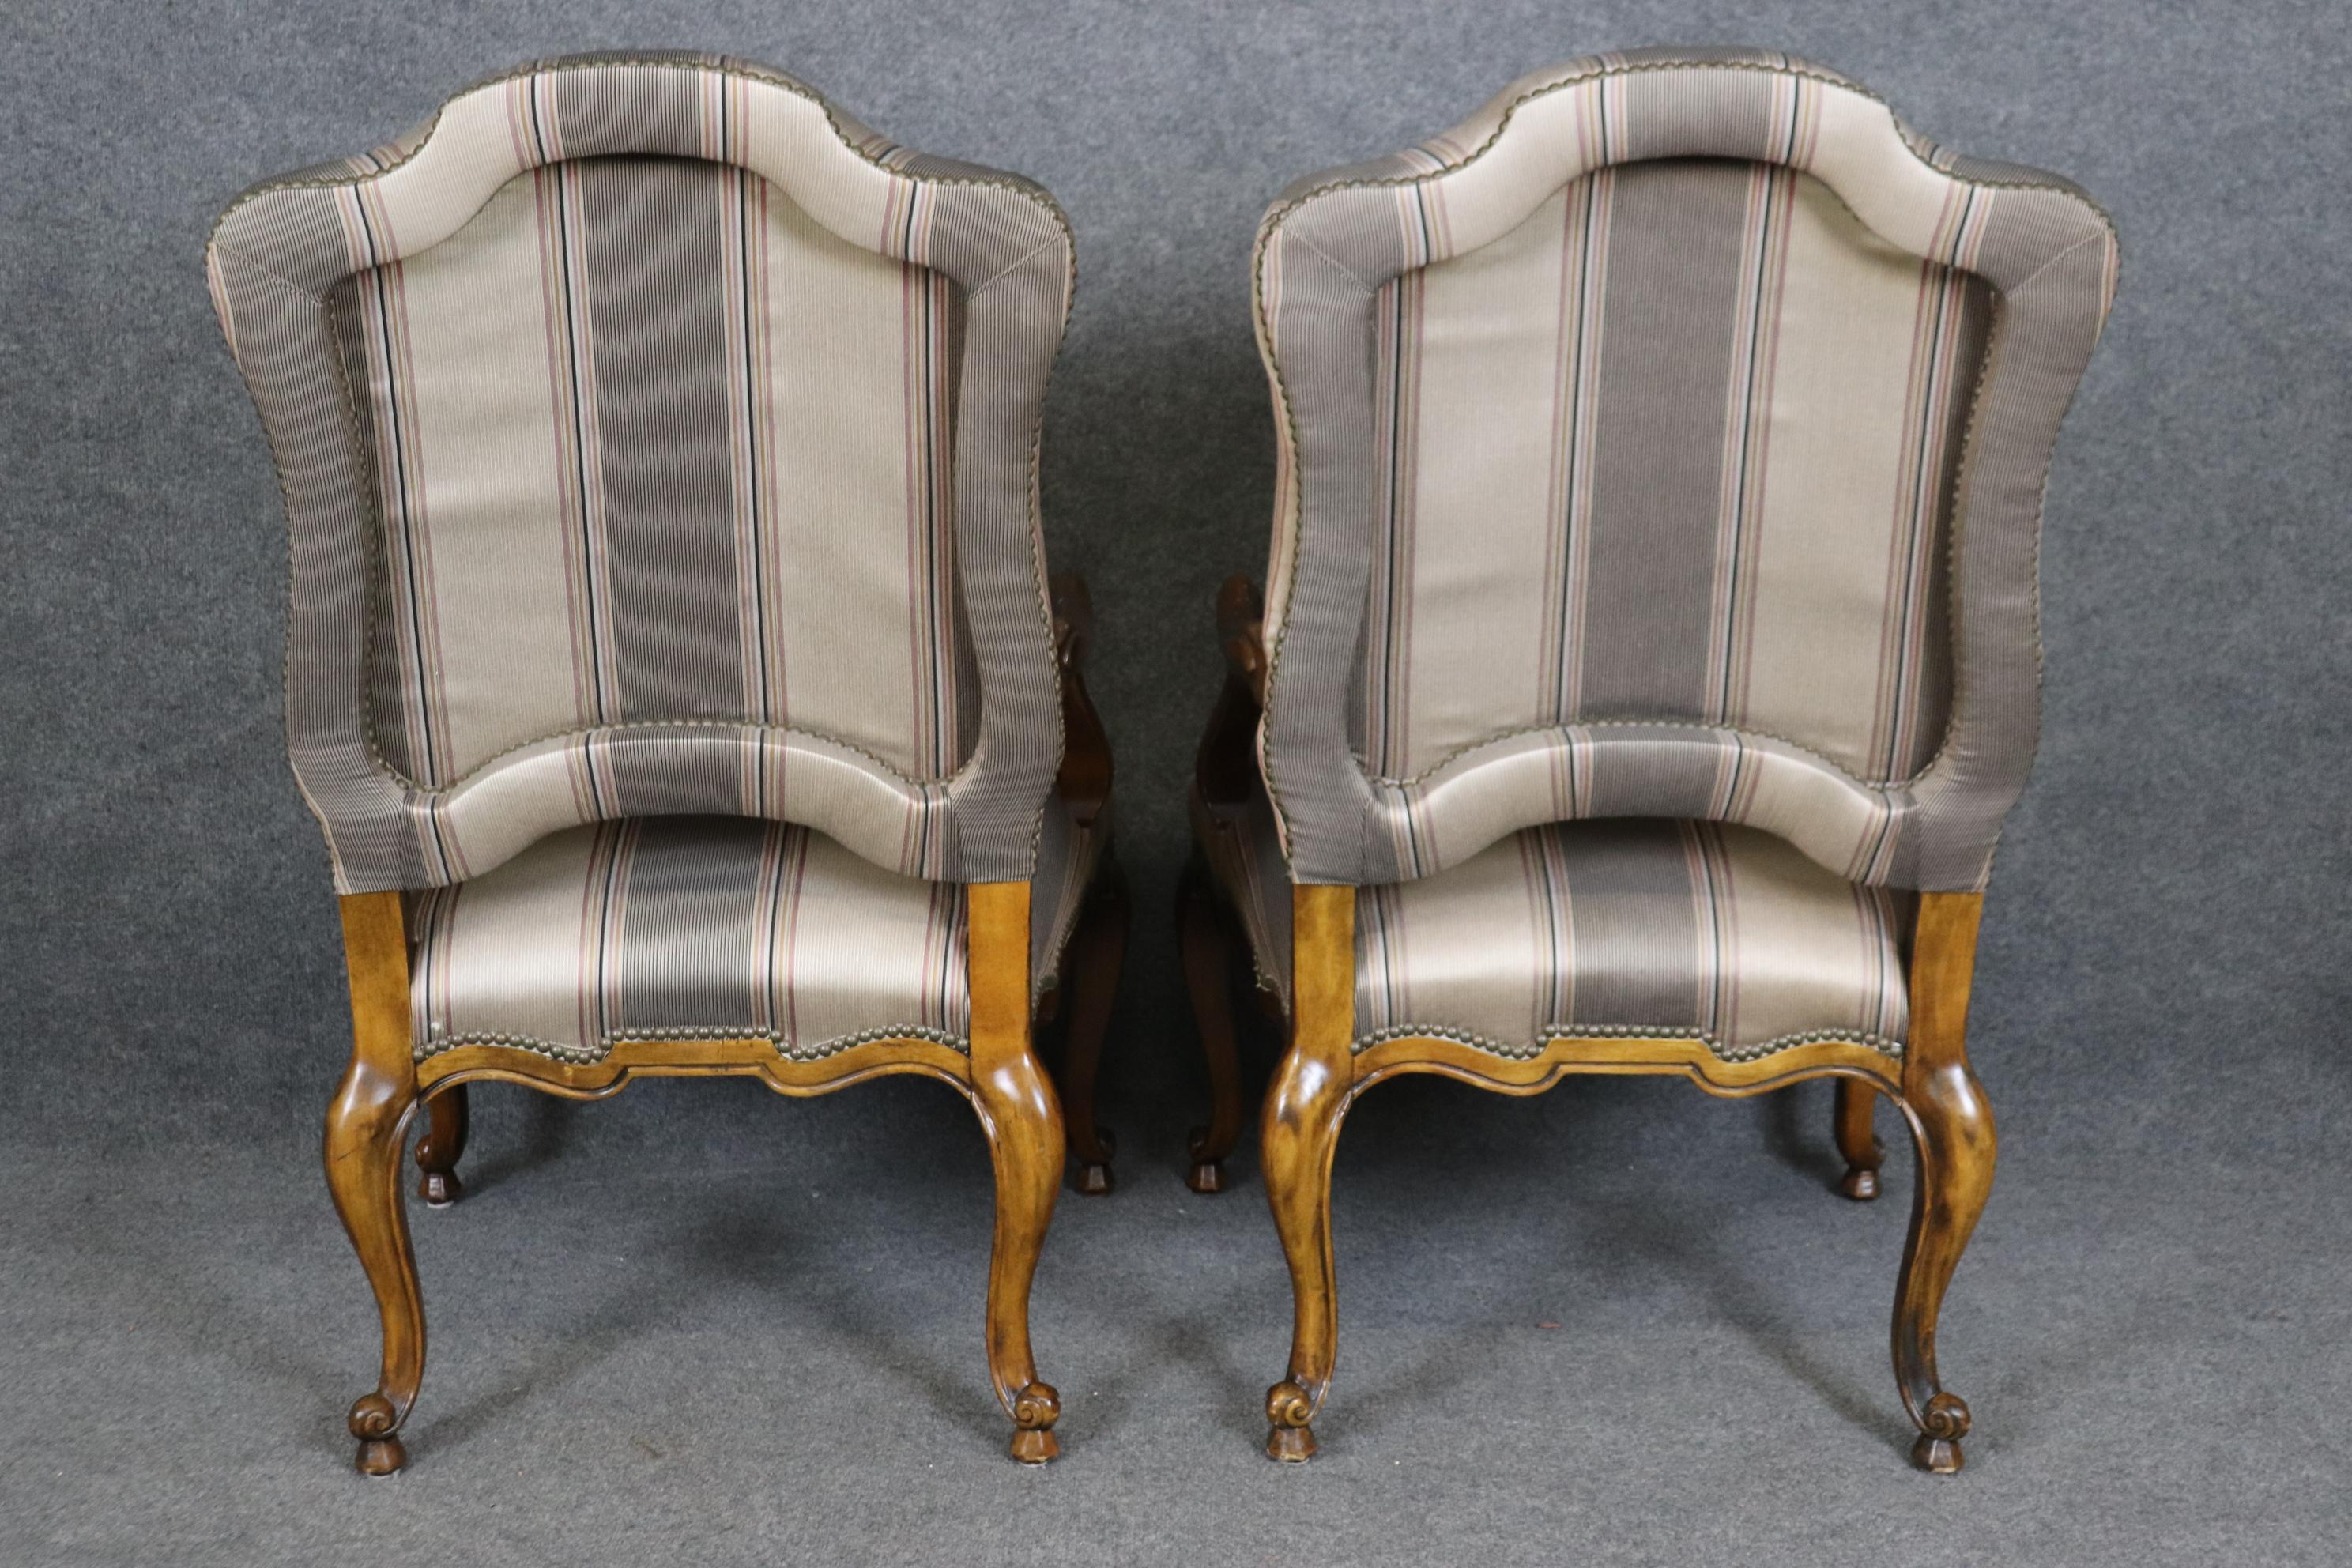 Pair of Gorgeous Century French Louis XV Walnut Armchairs Striped Upholstery In Good Condition For Sale In Swedesboro, NJ